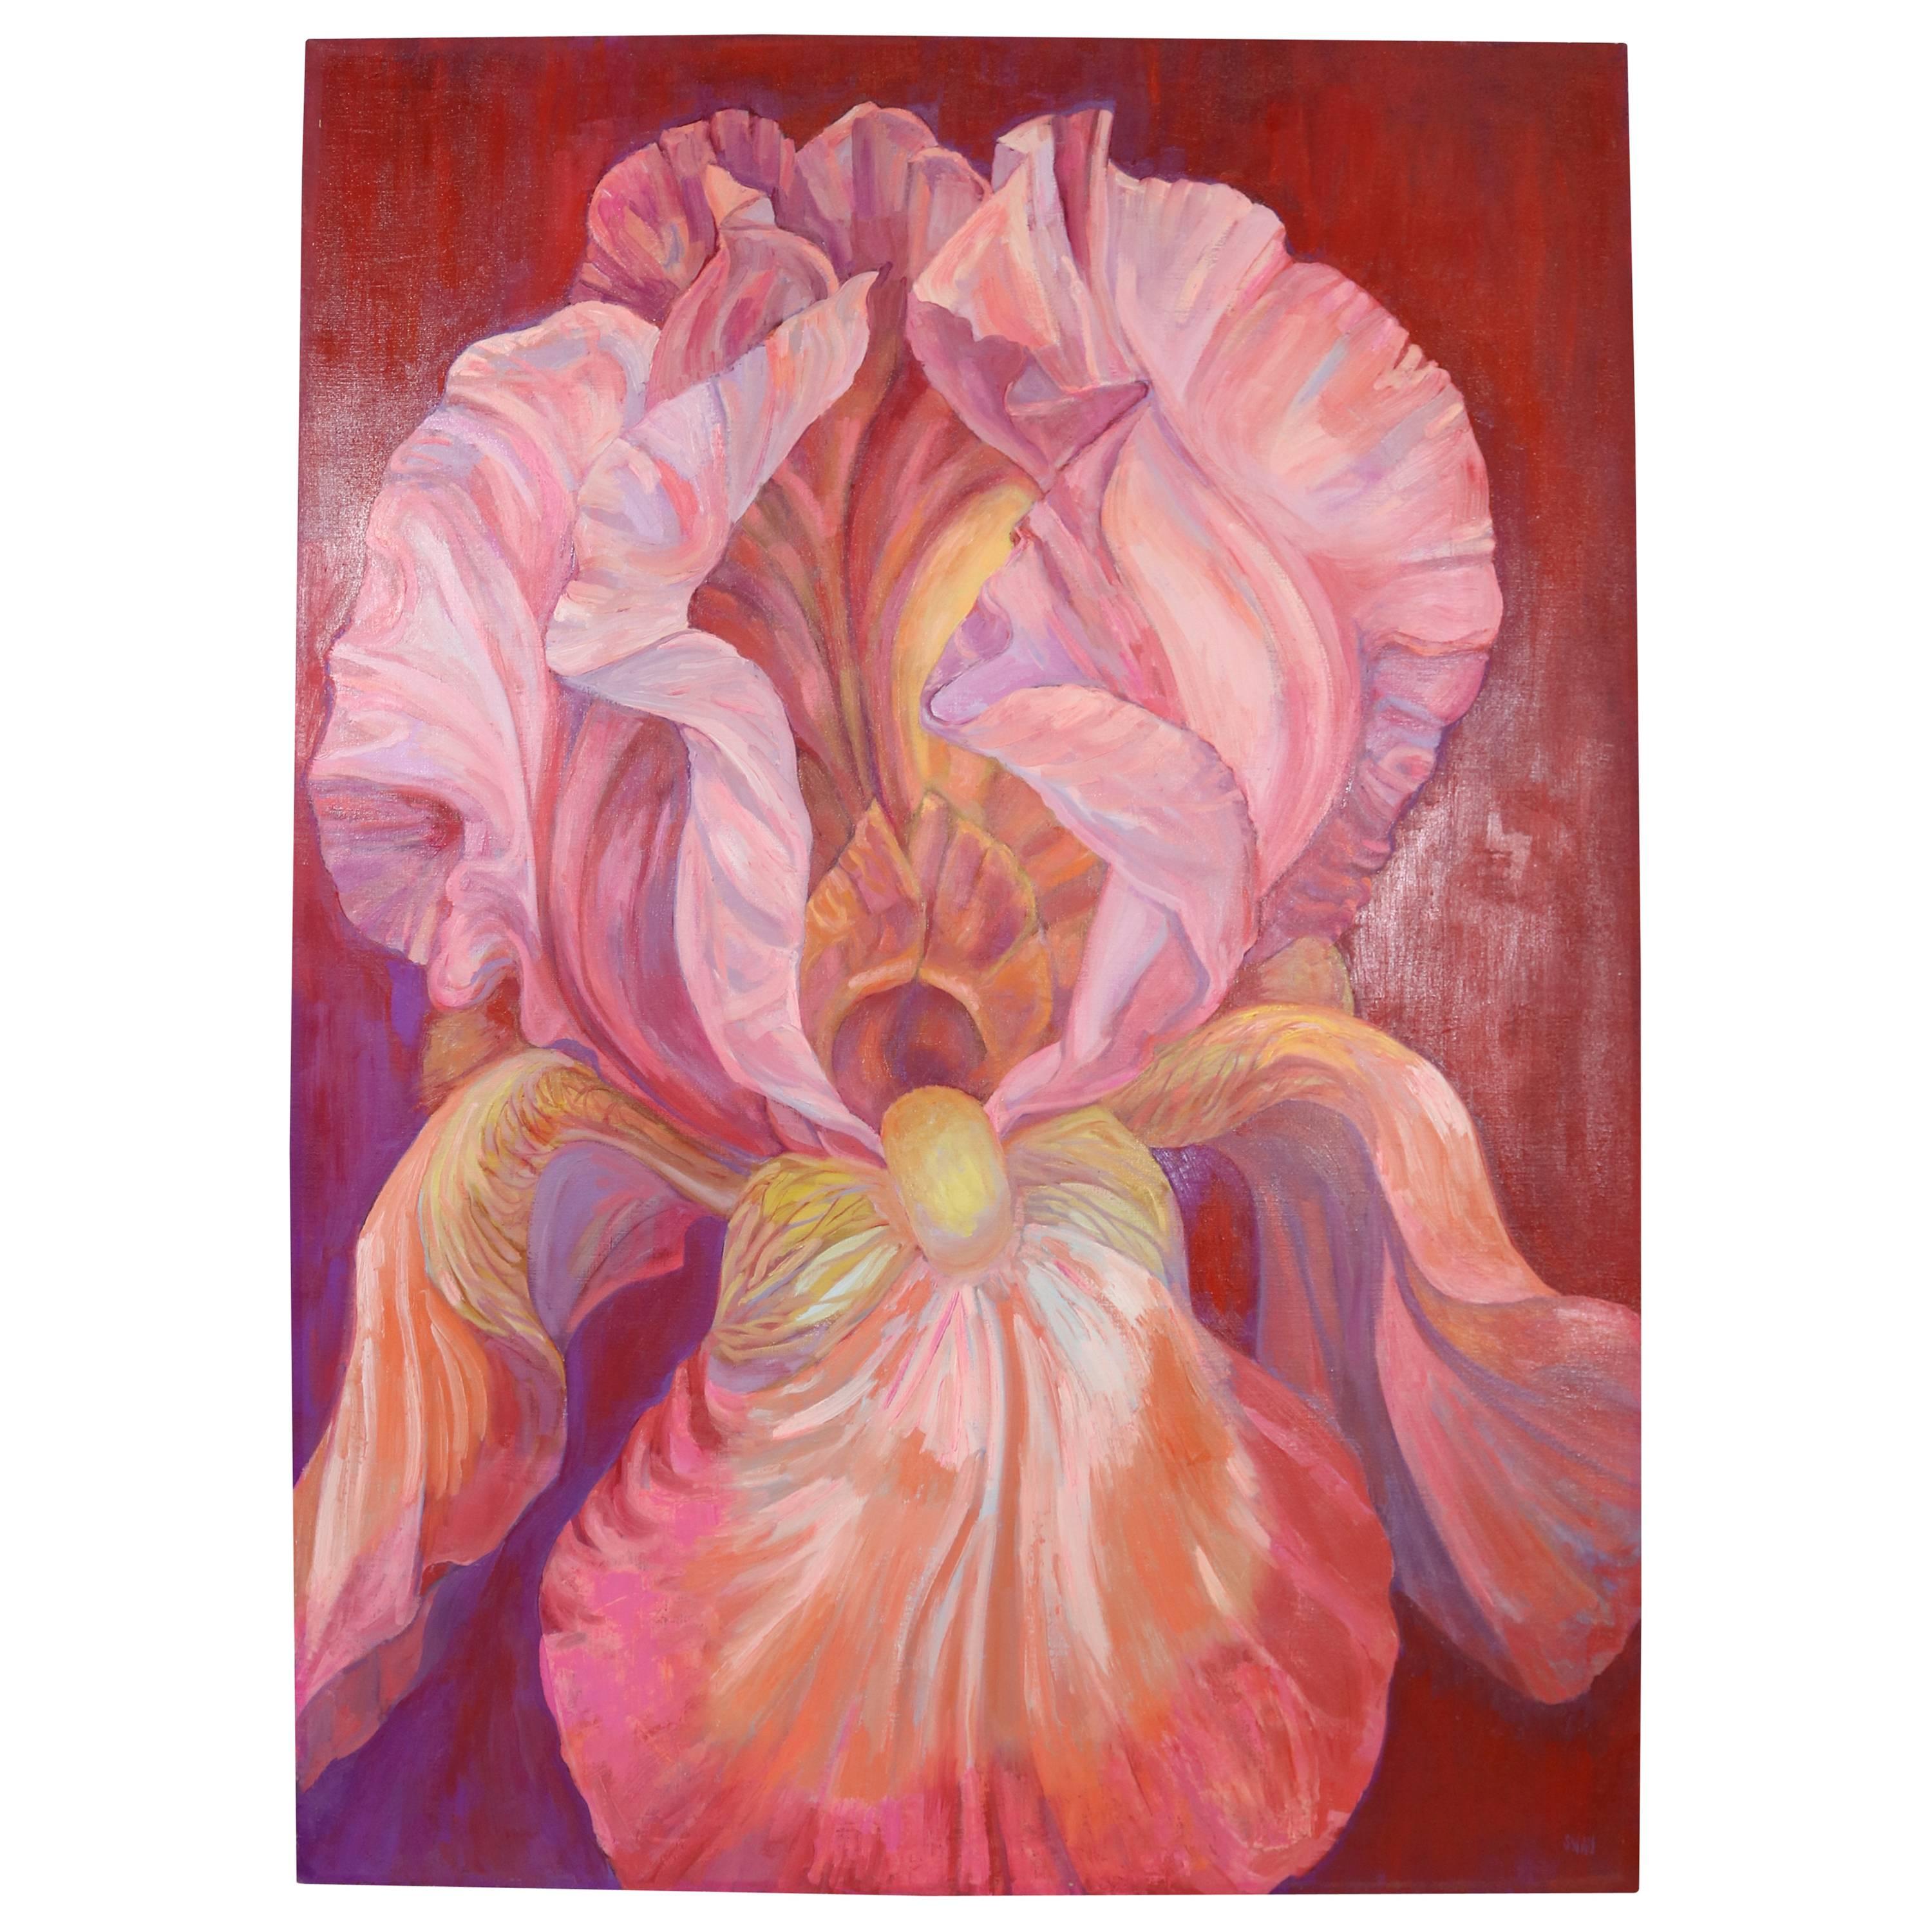 1972 "Pink Iris" Oil on Canvas by Noted Boston Artist Barbara Swan, (1922-2003) For Sale